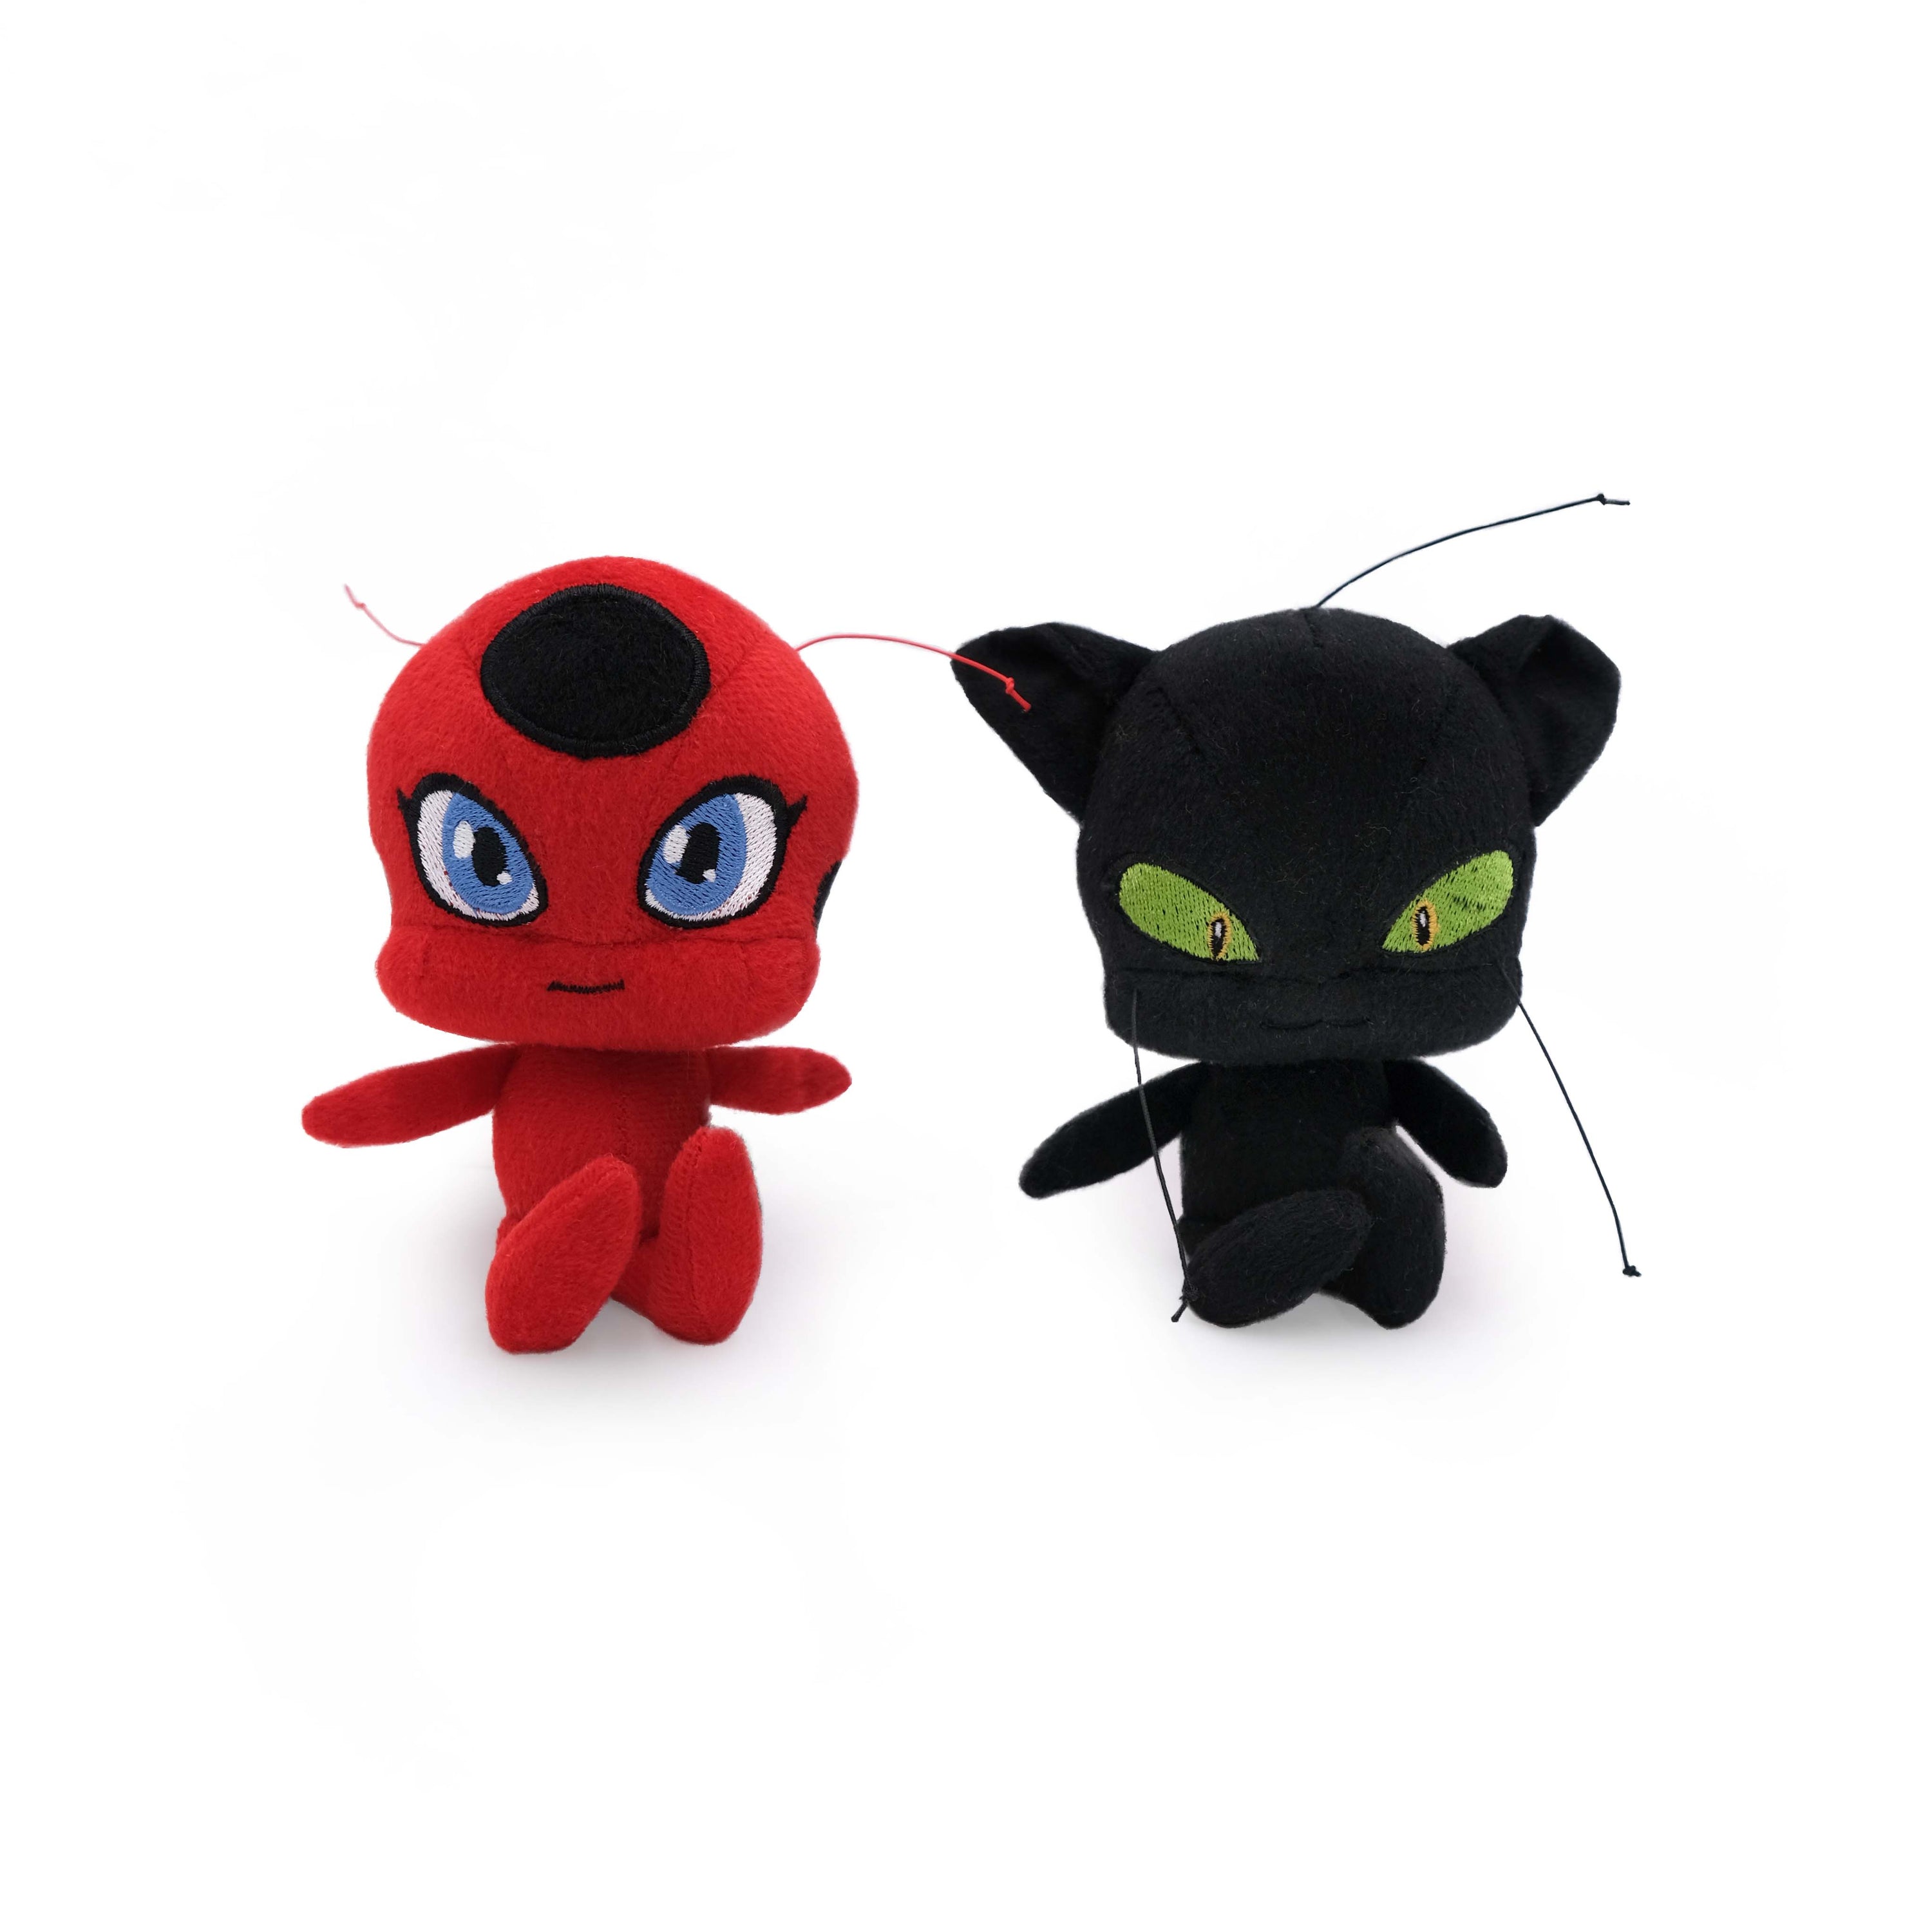 Miraculous Kwamis 2-Pack - Tikki and Plagg